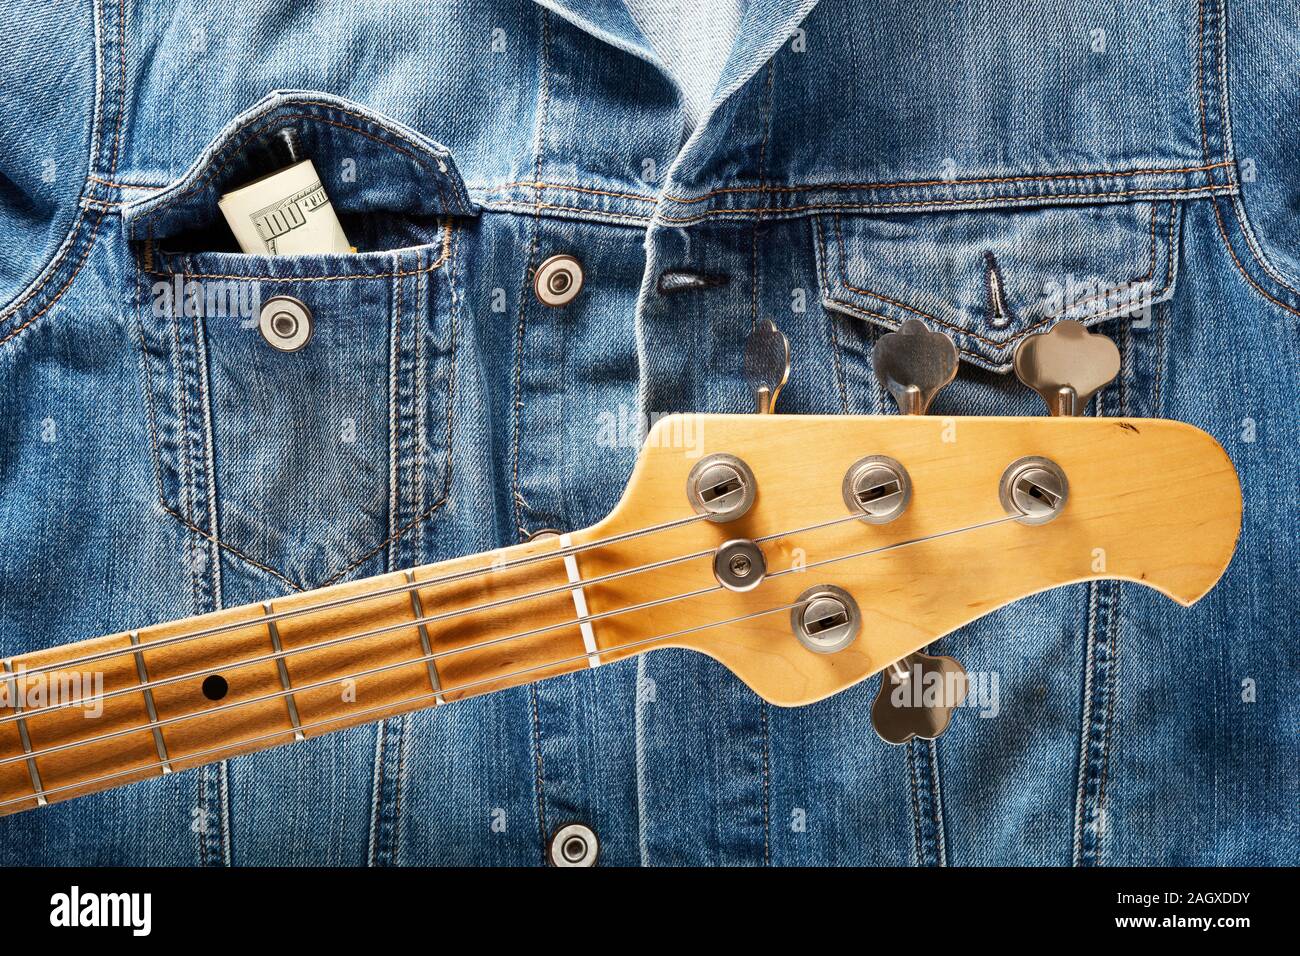 Bass guitar headstock and one dollar bills in the pocket of  denim jeans jacket. Concept of  making or earning money in music industry. Stock Photo